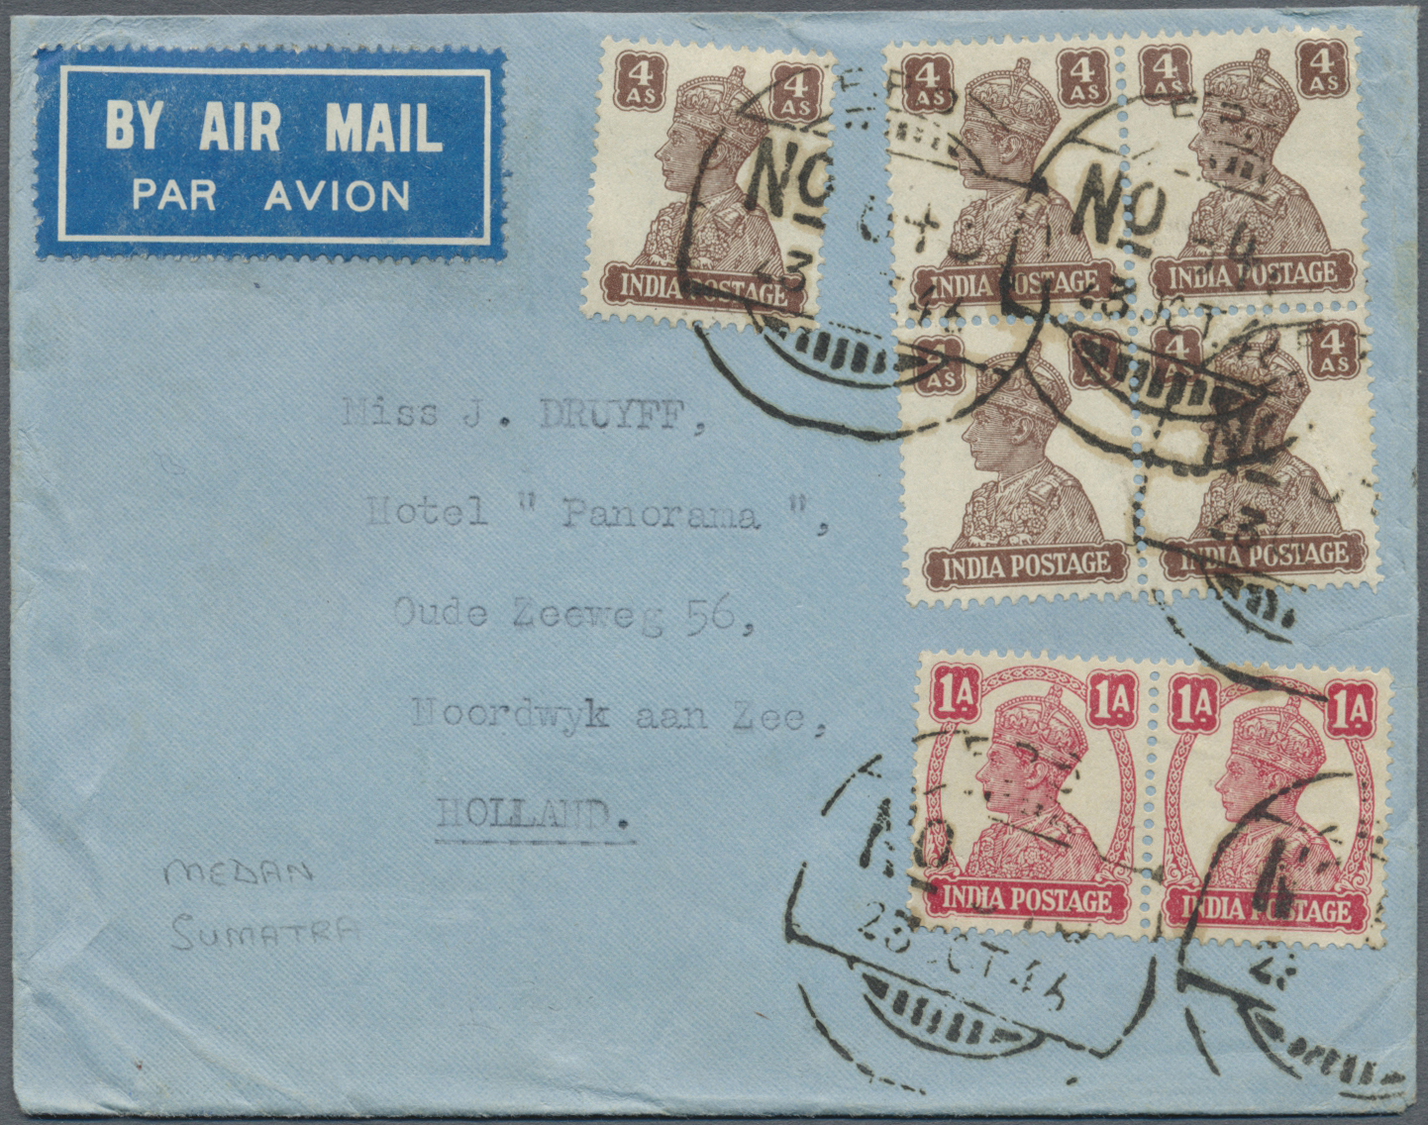 Br Indien - Feldpost: 1946. Air Mail Envelope Headed 'On Active Service' Written From 'E. Godfrey, Corporal 7181' Addres - Military Service Stamp